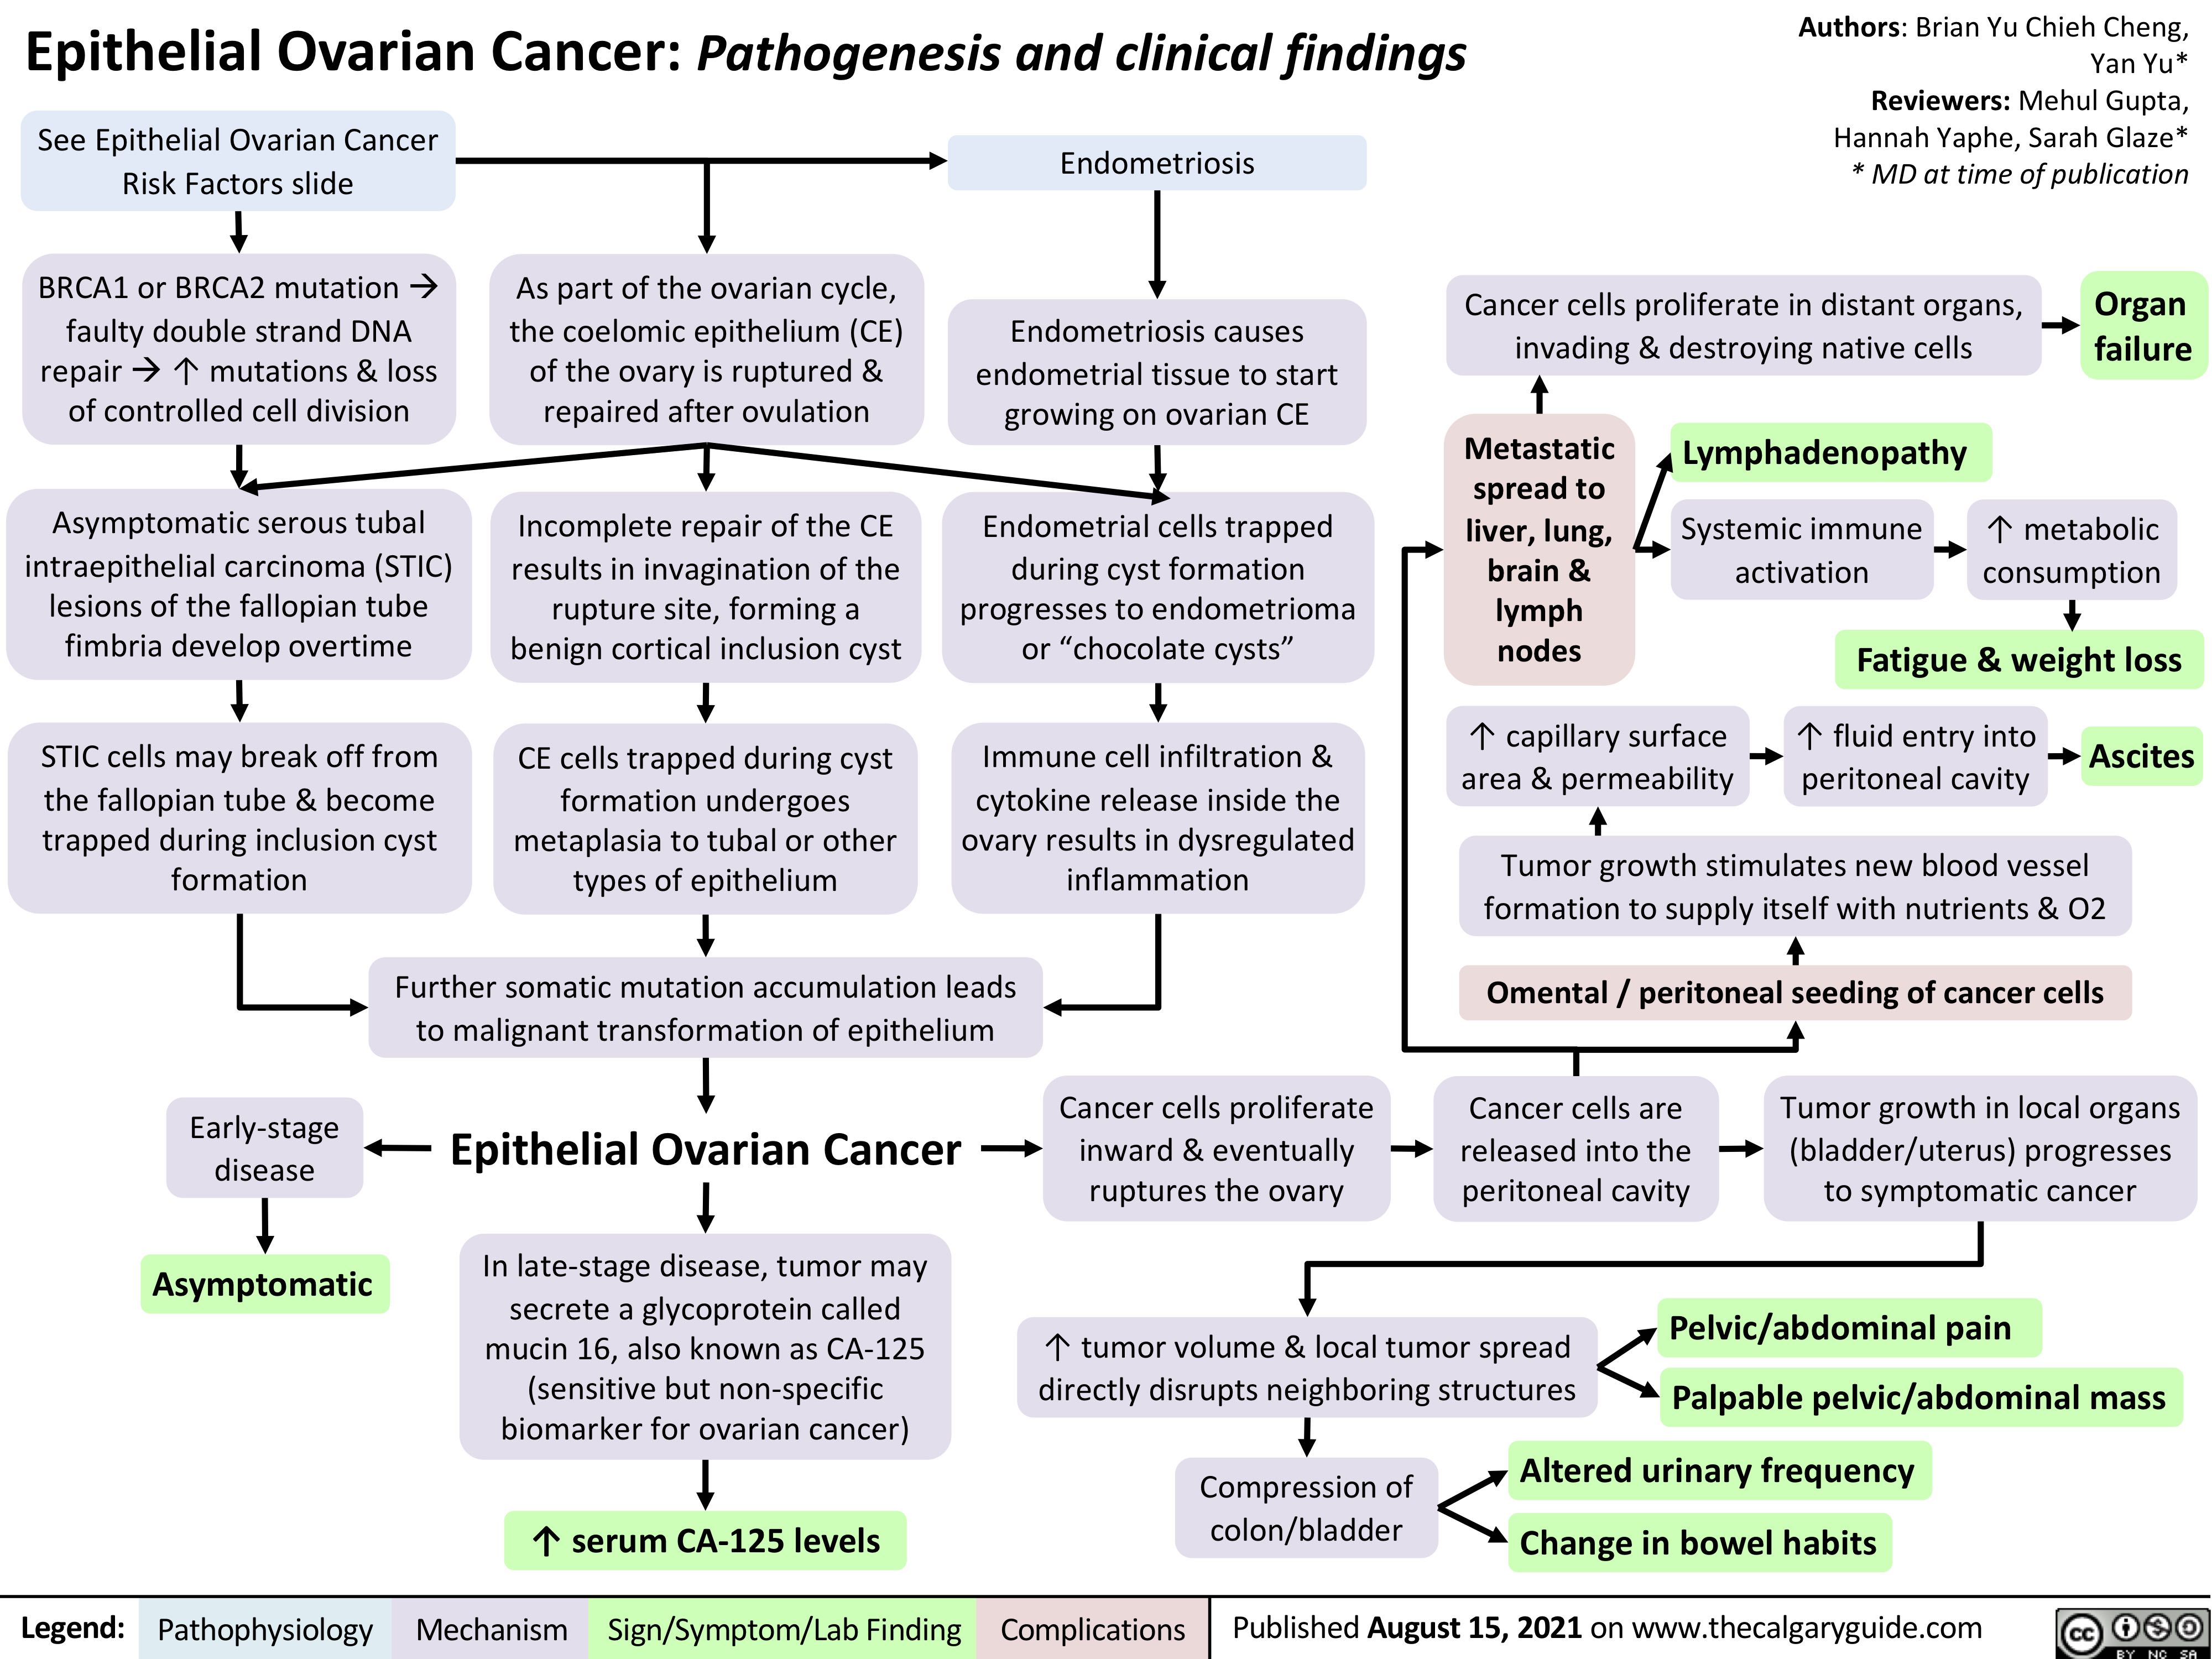 Epithelial Ovarian Cancer: Pathogenesis and clinical findings
Authors: Brian Yu Chieh Cheng, Yan Yu* Reviewers: Mehul Gupta, Hannah Yaphe, Sarah Glaze* * MD at time of publication
 See Epithelial Ovarian Cancer Risk Factors slide
BRCA1 or BRCA2 mutationà faulty double strand DNA
repairà↑ mutations & loss of controlled cell division
Asymptomatic serous tubal intraepithelial carcinoma (STIC)
lesions of the fallopian tube fimbria develop overtime
STIC cells may break off from the fallopian tube & become trapped during inclusion cyst formation
As part of the ovarian cycle, the coelomic epithelium (CE) of the ovary is ruptured & repaired after ovulation
Incomplete repair of the CE results in invagination of the
rupture site, forming a benign cortical inclusion cyst
CE cells trapped during cyst formation undergoes metaplasia to tubal or other types of epithelium
Endometriosis
Endometriosis causes endometrial tissue to start growing on ovarian CE
Endometrial cells trapped during cyst formation progresses to endometrioma or “chocolate cysts”
Immune cell infiltration & cytokine release inside the
ovary results in dysregulated inflammation
Cancer cells proliferate in distant organs, invading & destroying native cells
Organ failure
          Metastatic spread to liver, lung, brain & lymph nodes
Lymphadenopathy
Systemic immune activation
↑ metabolic consumption
           ↑ capillary surface area & permeability
Fatigue & weight loss ↑ fluid entry into Ascites
peritoneal cavity
         Further somatic mutation accumulation leads to malignant transformation of epithelium
Tumor growth stimulates new blood vessel formation to supply itself with nutrients & O2
Omental / peritoneal seeding of cancer cells
     Early-stage disease
Asymptomatic
Epithelial Ovarian Cancer
In late-stage disease, tumor may secrete a glycoprotein called mucin 16, also known as CA-125 (sensitive but non-specific biomarker for ovarian cancer)
↑ serum CA-125 levels
Cancer cells proliferate inward & eventually ruptures the ovary
Cancer cells are released into the peritoneal cavity
Tumor growth in local organs (bladder/uterus) progresses to symptomatic cancer
     ↑ tumor volume & local tumor spread directly disrupts neighboring structures
Pelvic/abdominal pain
 Palpable pelvic/abdominal mass Altered urinary frequency
  Compression of
colon/bladder Change in bowel habits
   Legend:
 Pathophysiology
 Mechanism
Sign/Symptom/Lab Finding
 Complications
Published August 15, 2021 on www.thecalgaryguide.com
   